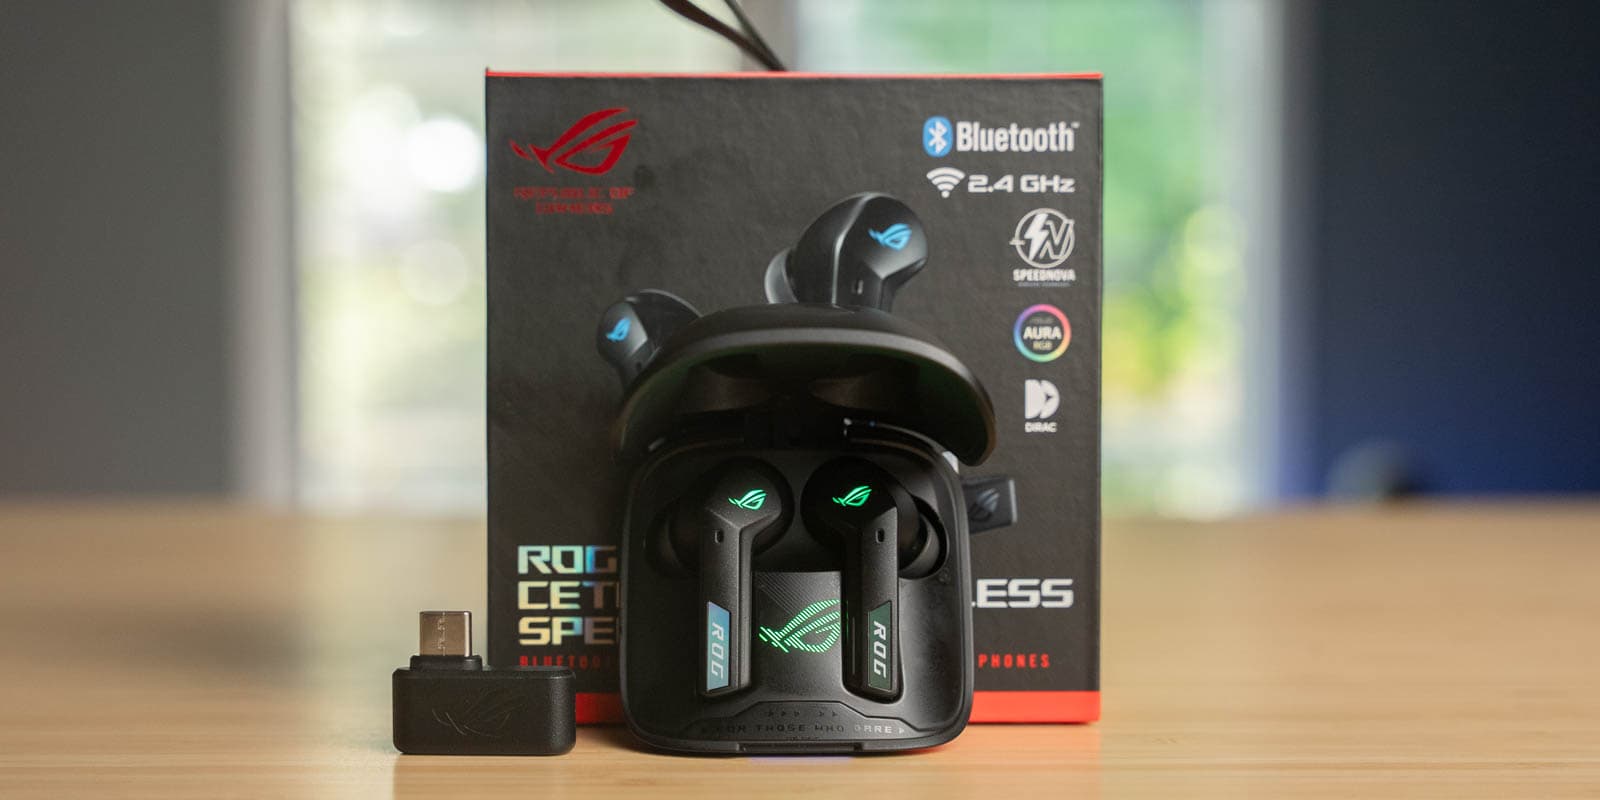 ROG Cetra SpeedNova: Are TWS earbuds good for gaming?